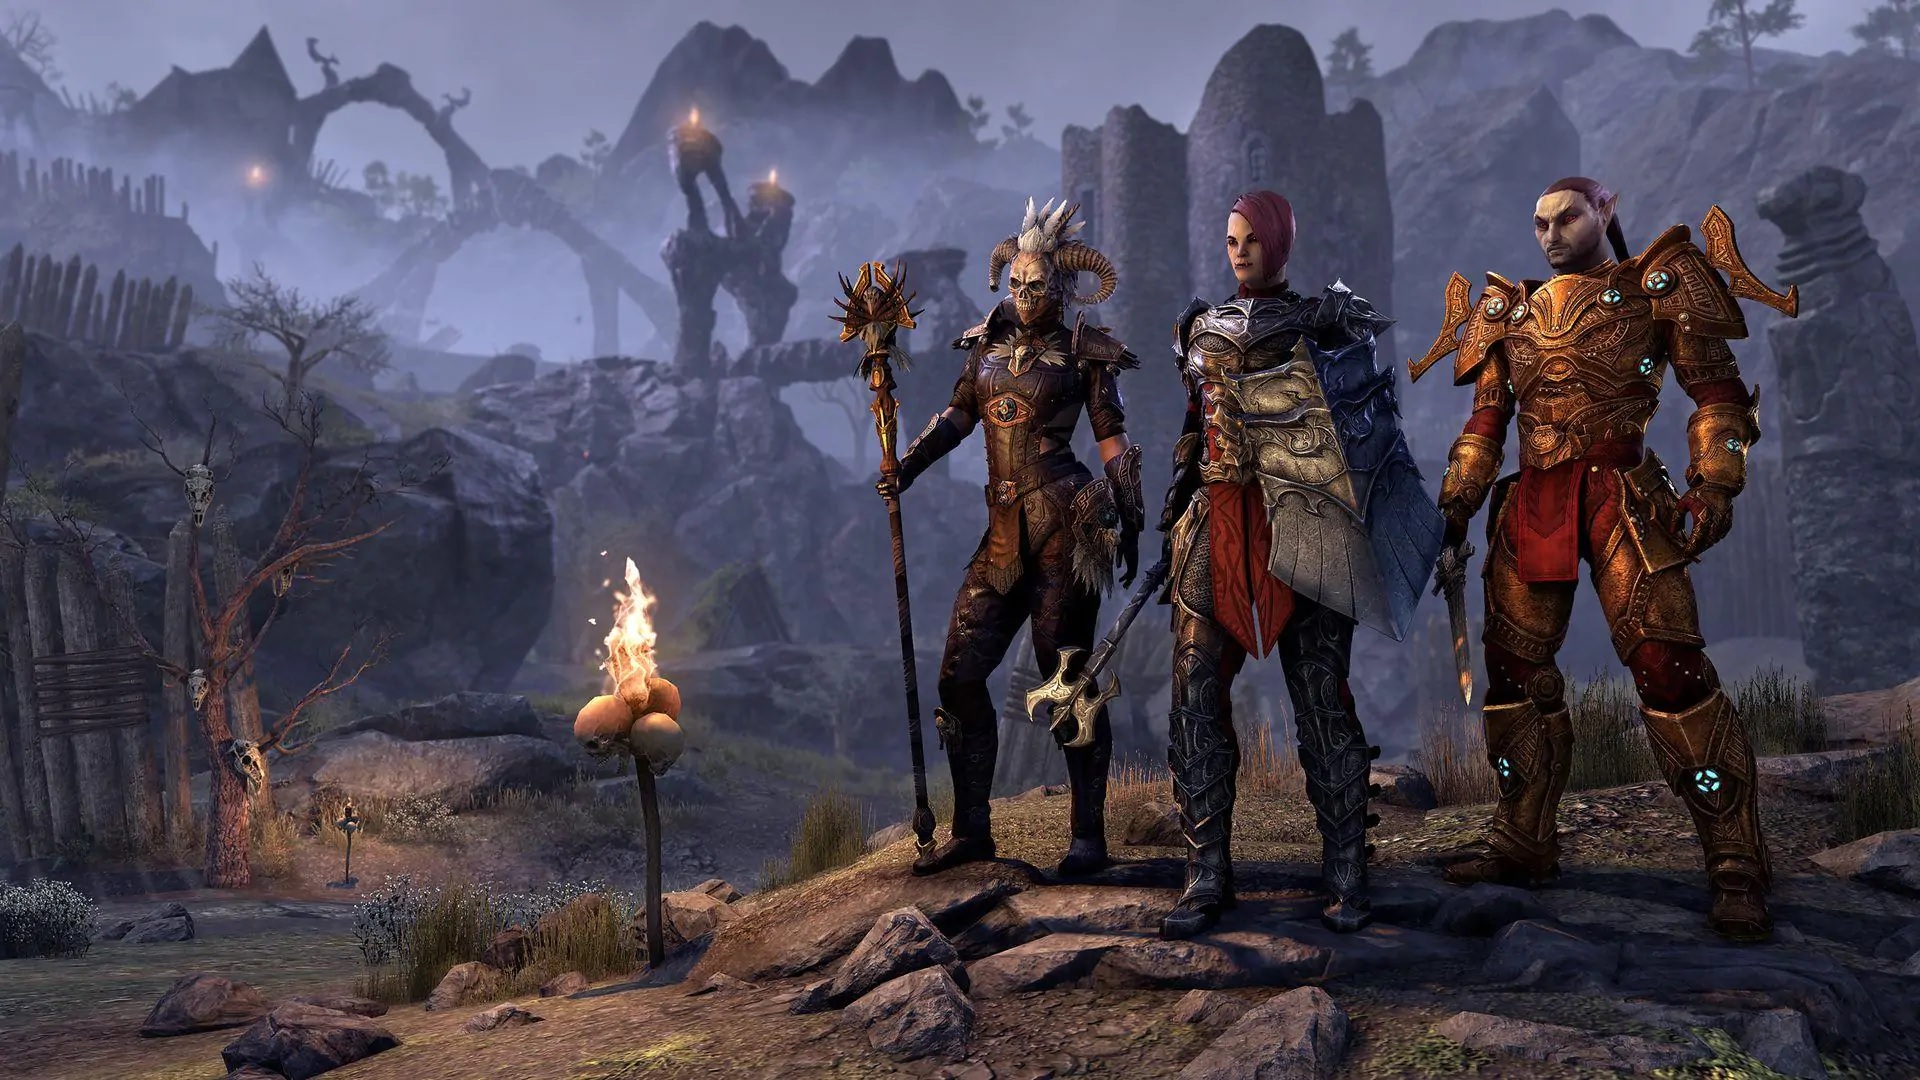 The Elder Scrolls Online Update 28 and Markarth DLC Now Available for PC and Mac